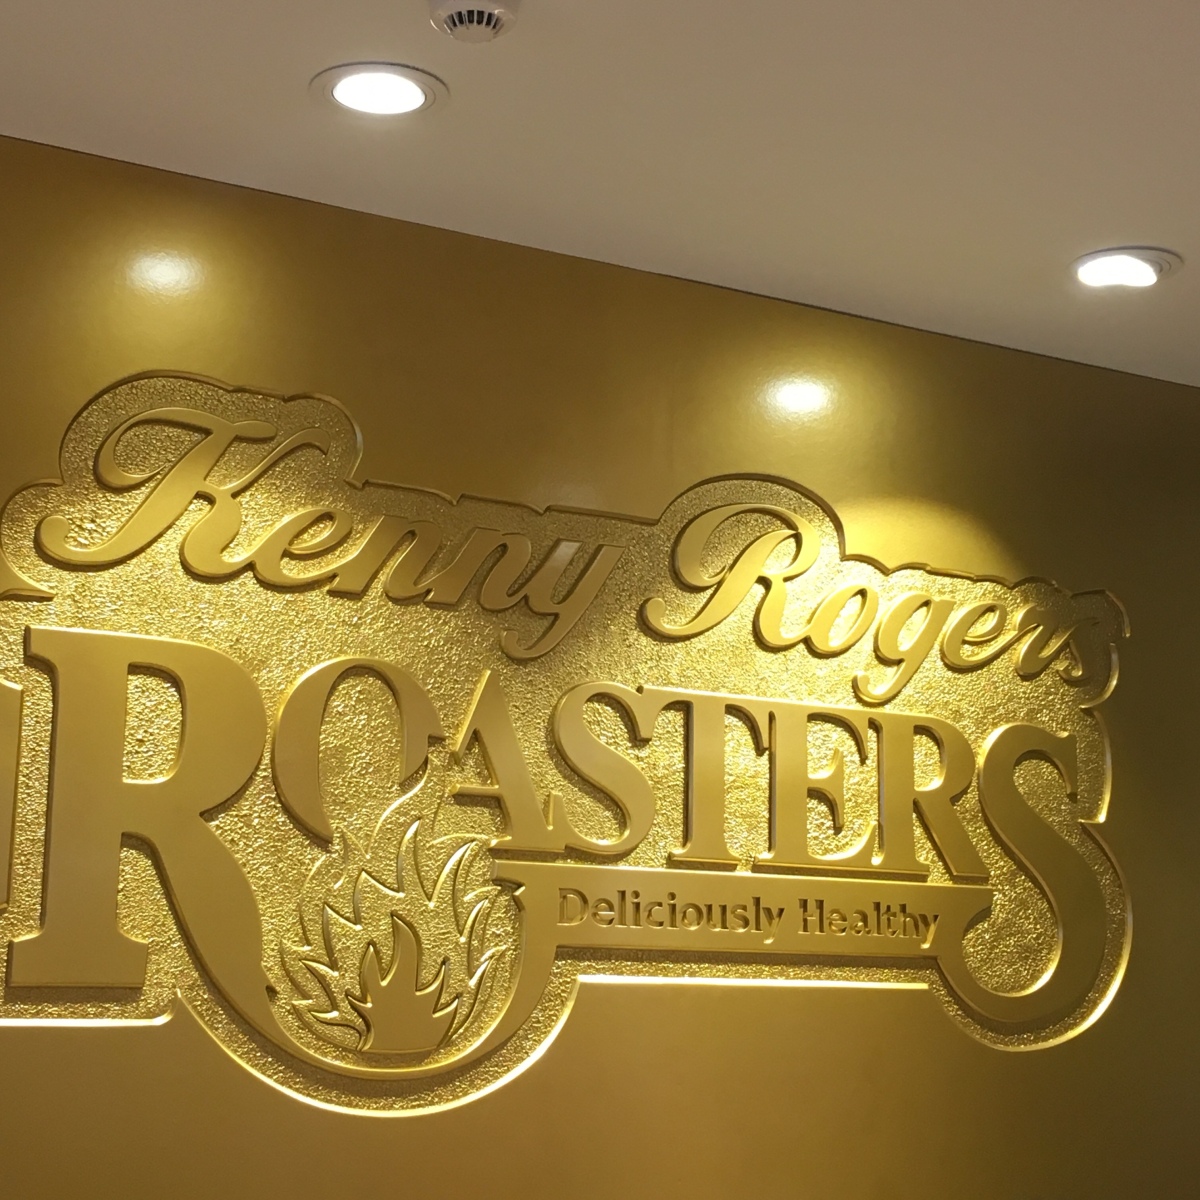 Wholesome fare at Kenny Rogers Roasters, SM East Ortigas